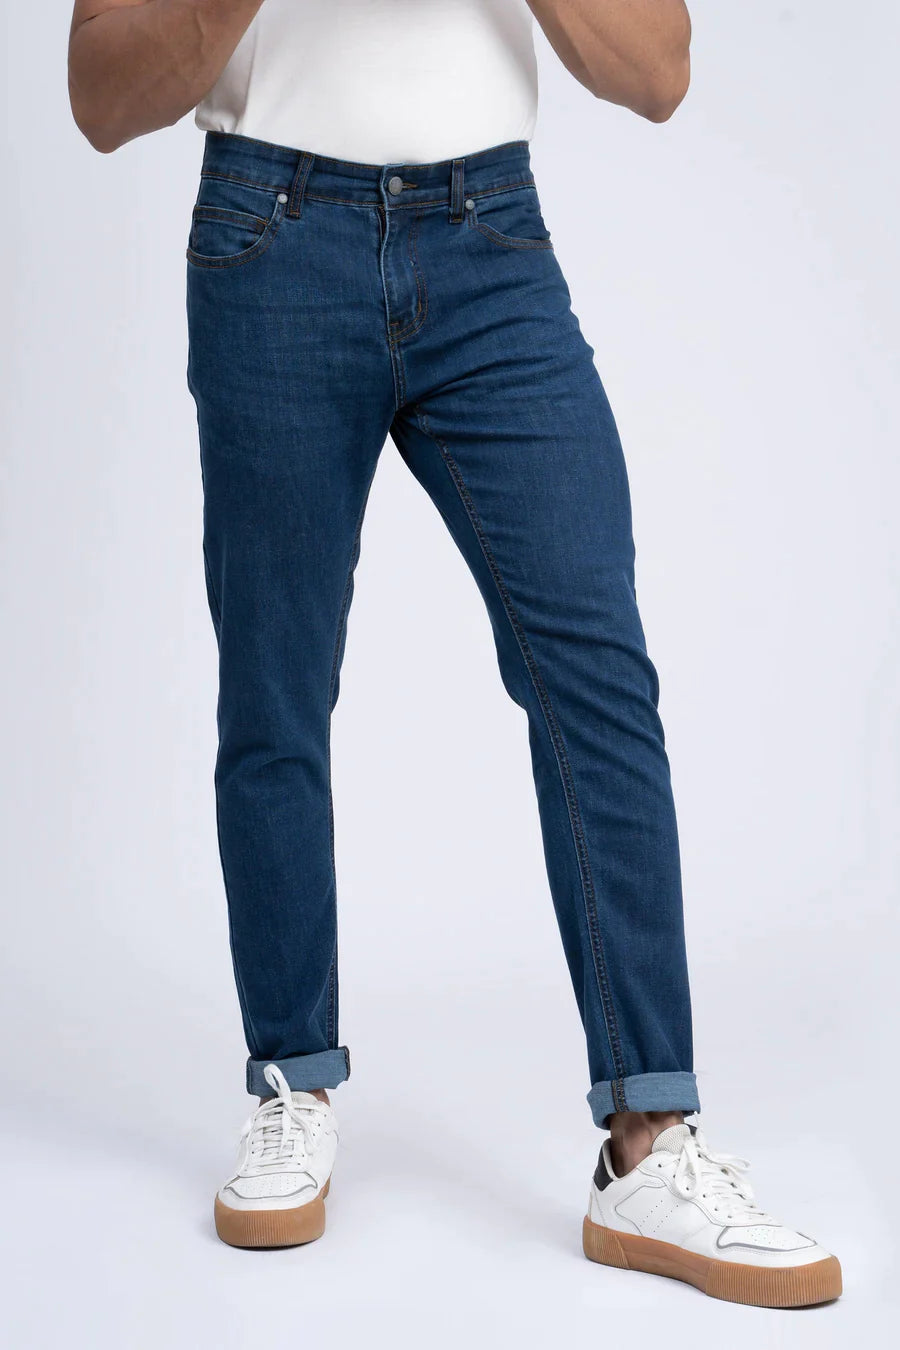 Jeans For Men at Charcoal Clothing